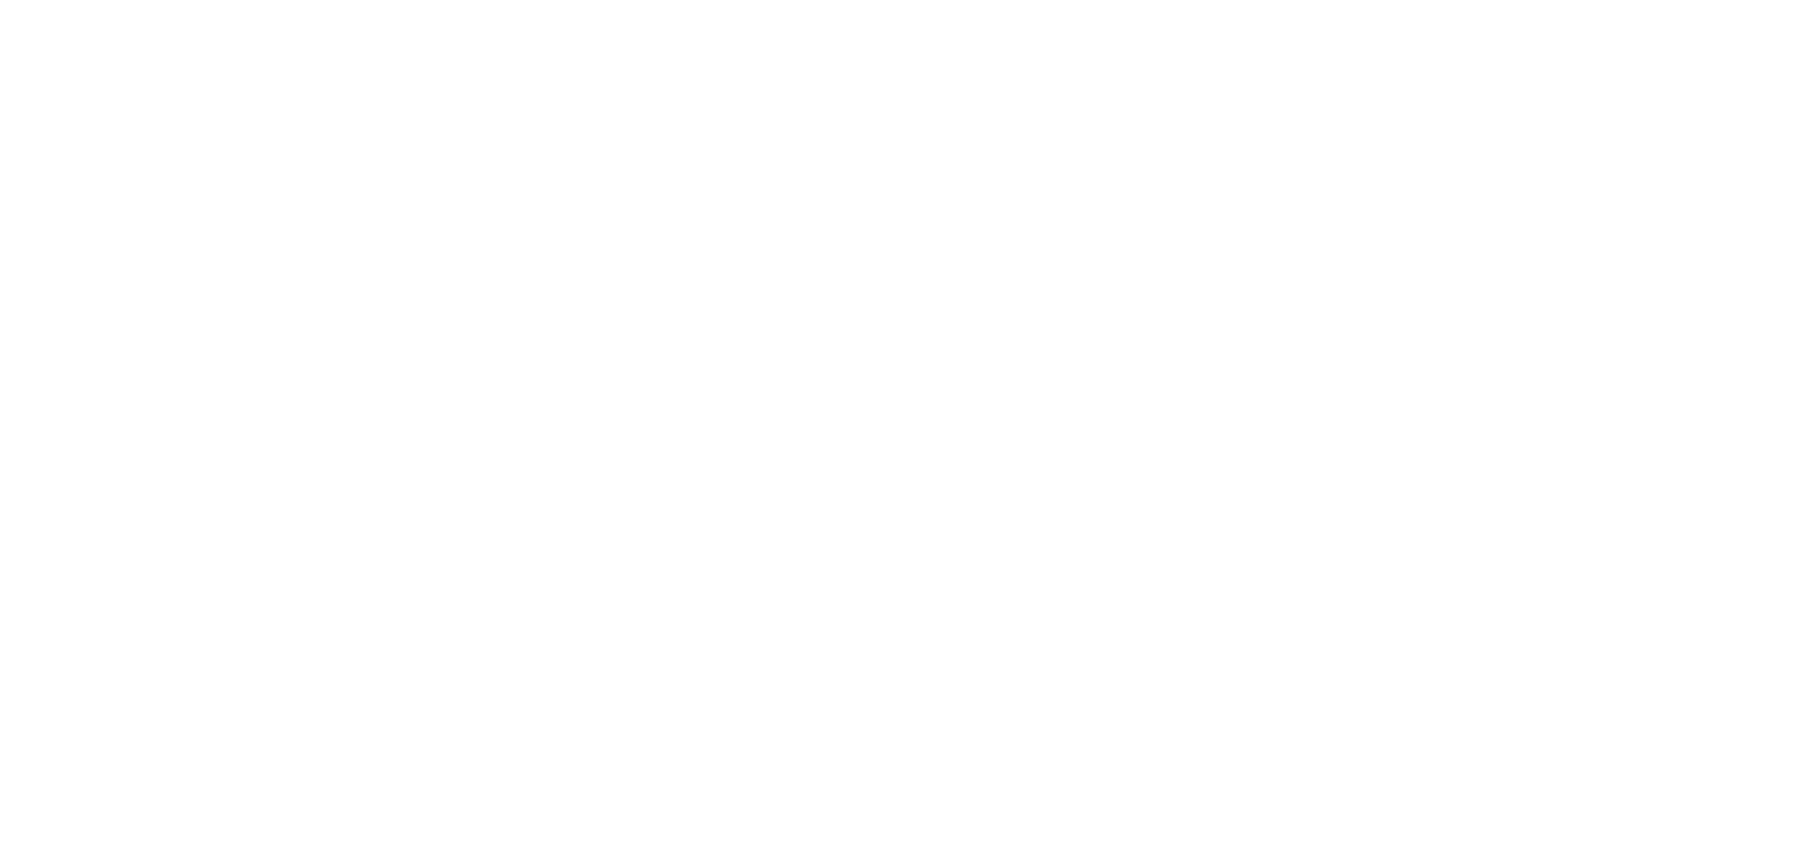 100+ component funds for specific purposes